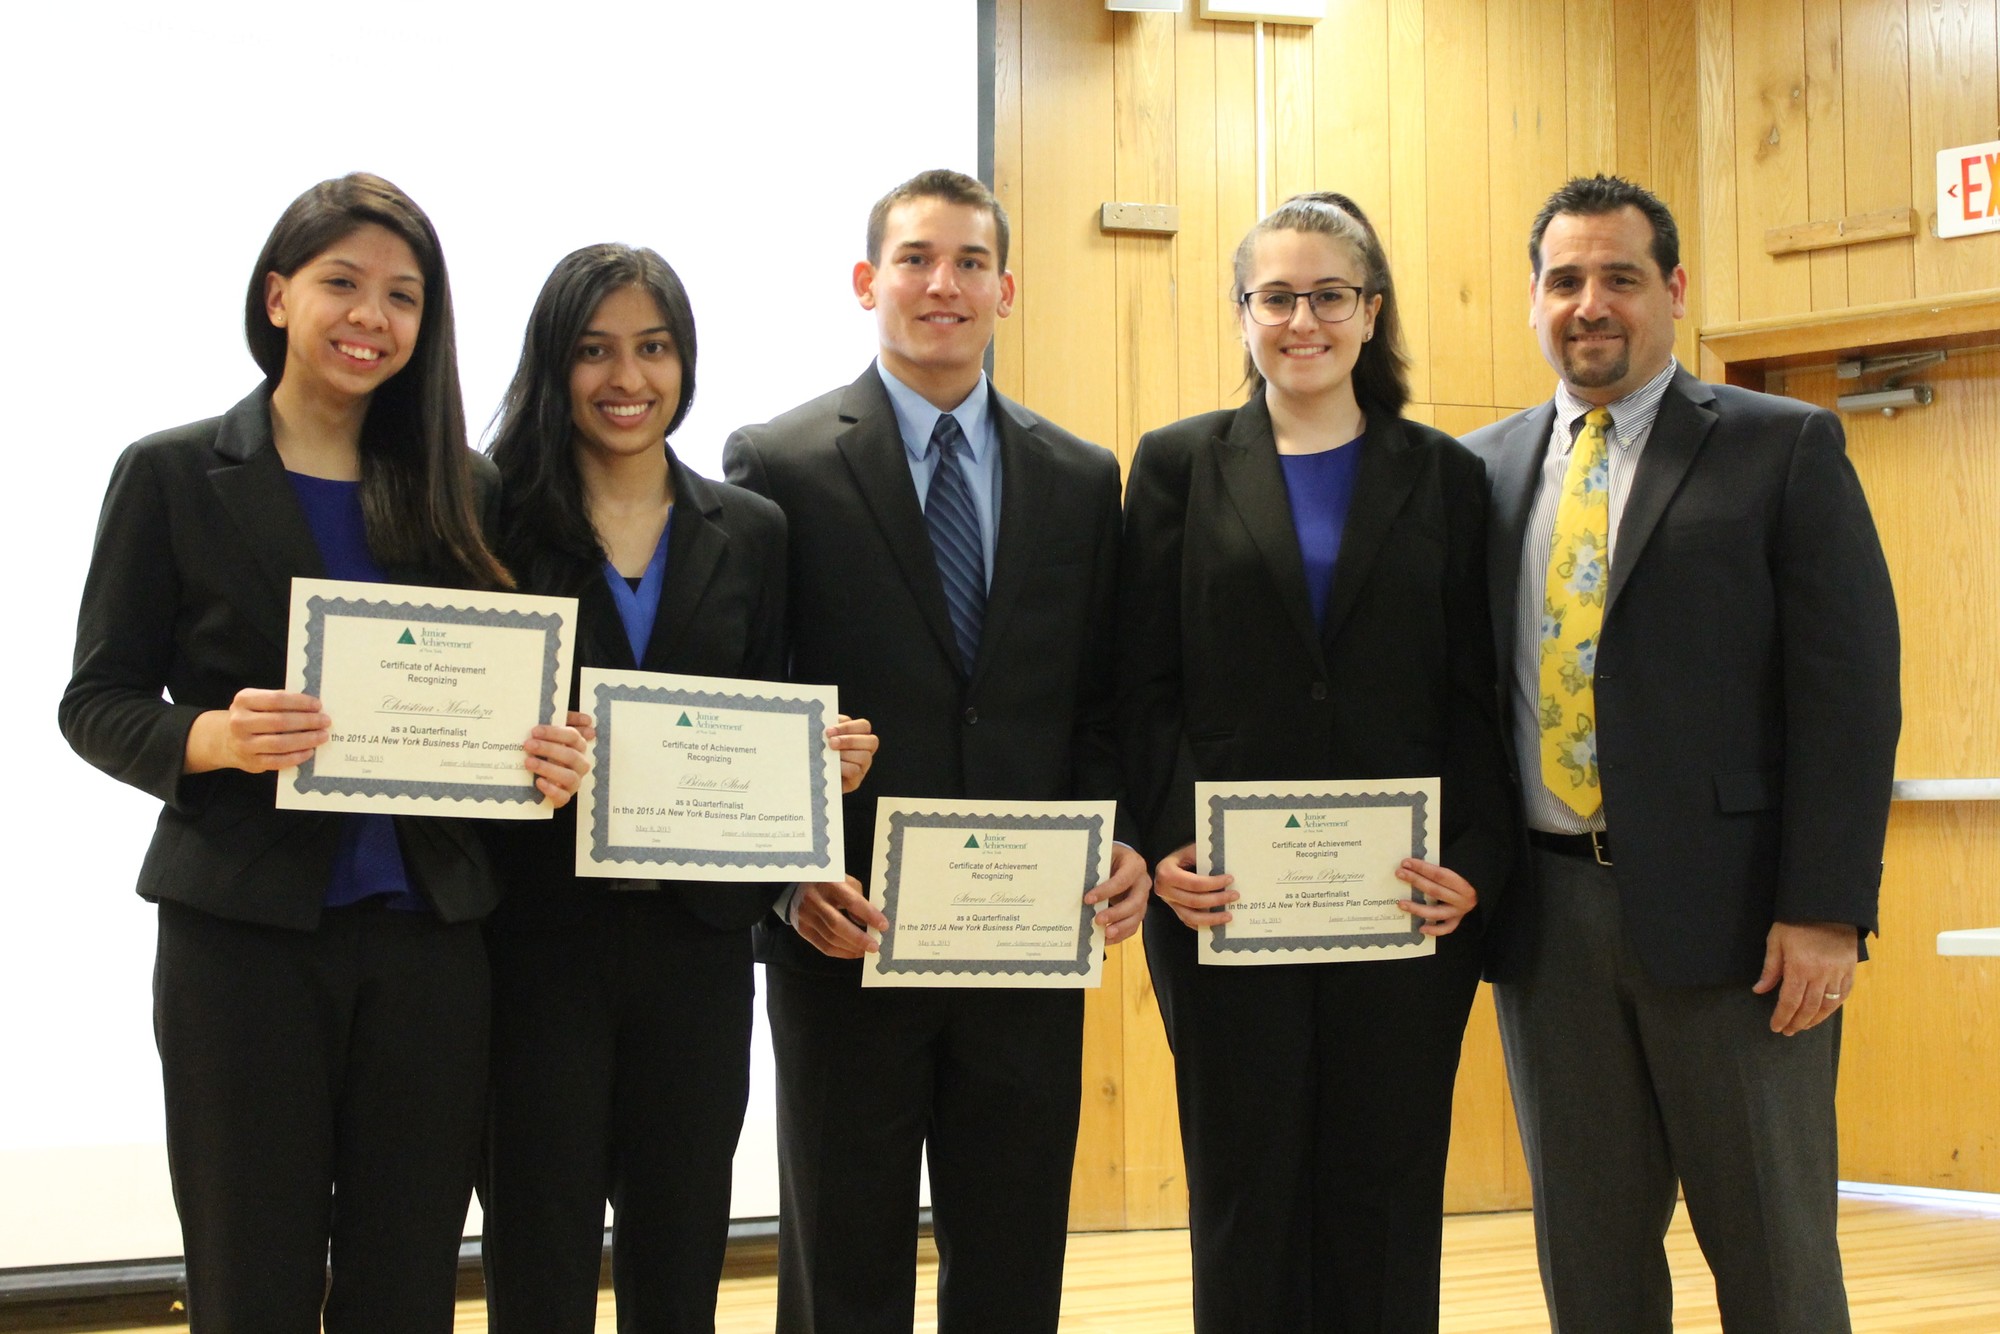 Team PinPoint included students Christina Mendoza, Binita Shah, Steven Davidson, and Karen Papazian. The group earned first place at the May 8 school round. They were pictured with Pavia, at right.